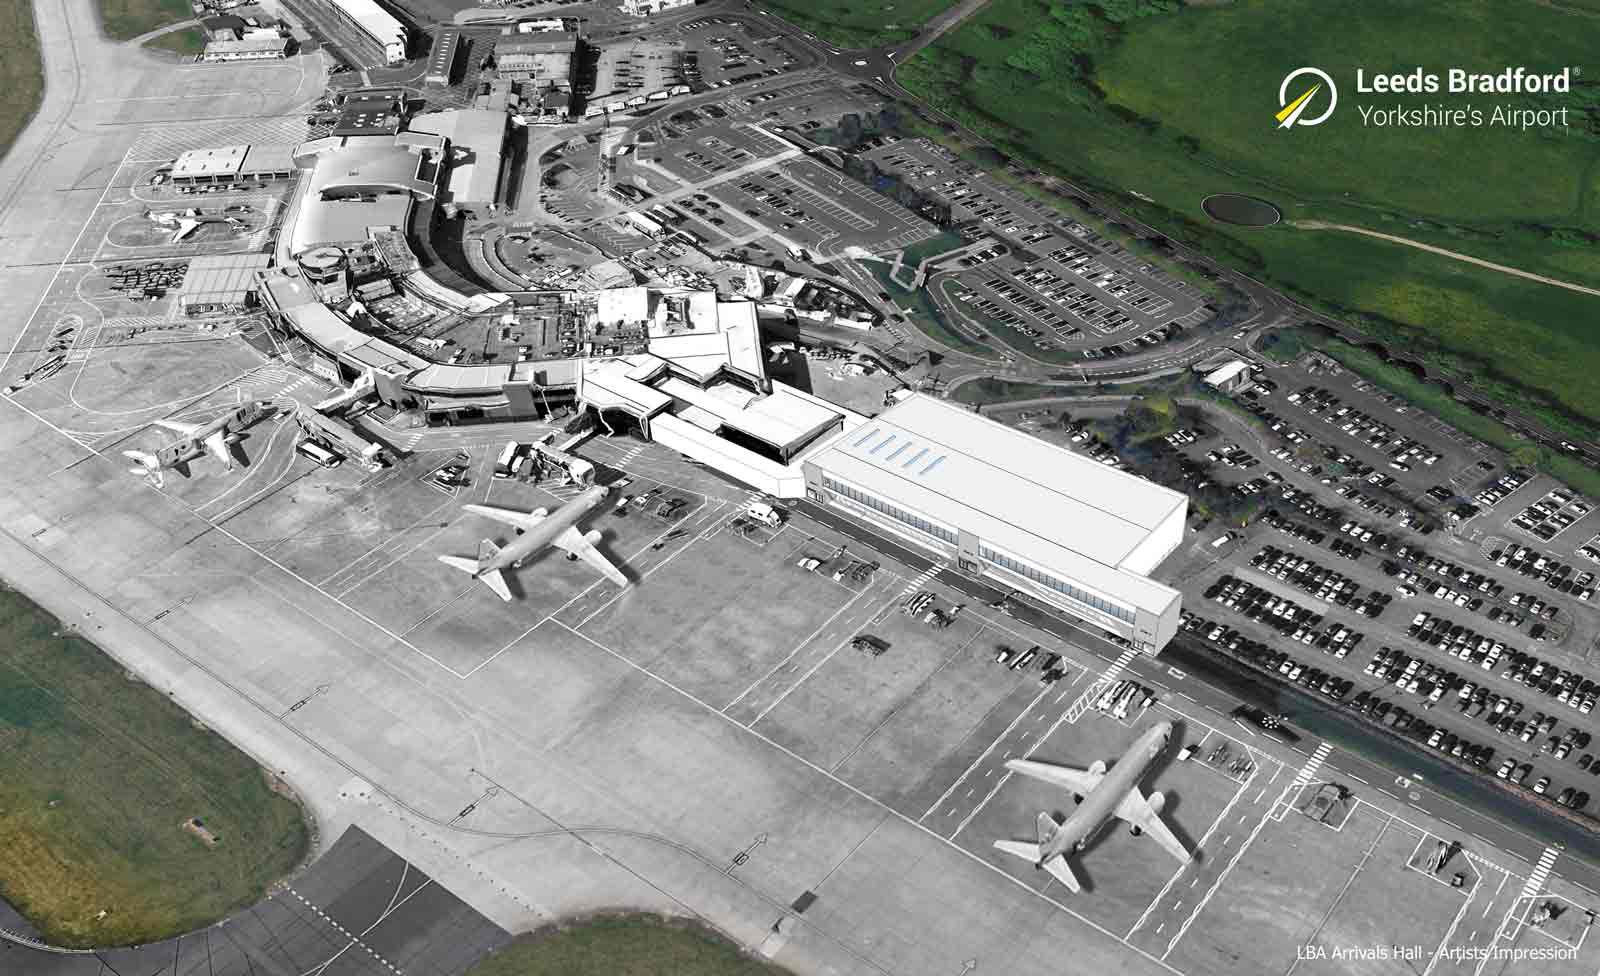 Leeds Bradford Airport is delighted to announce the next phase of its redevelopment plan